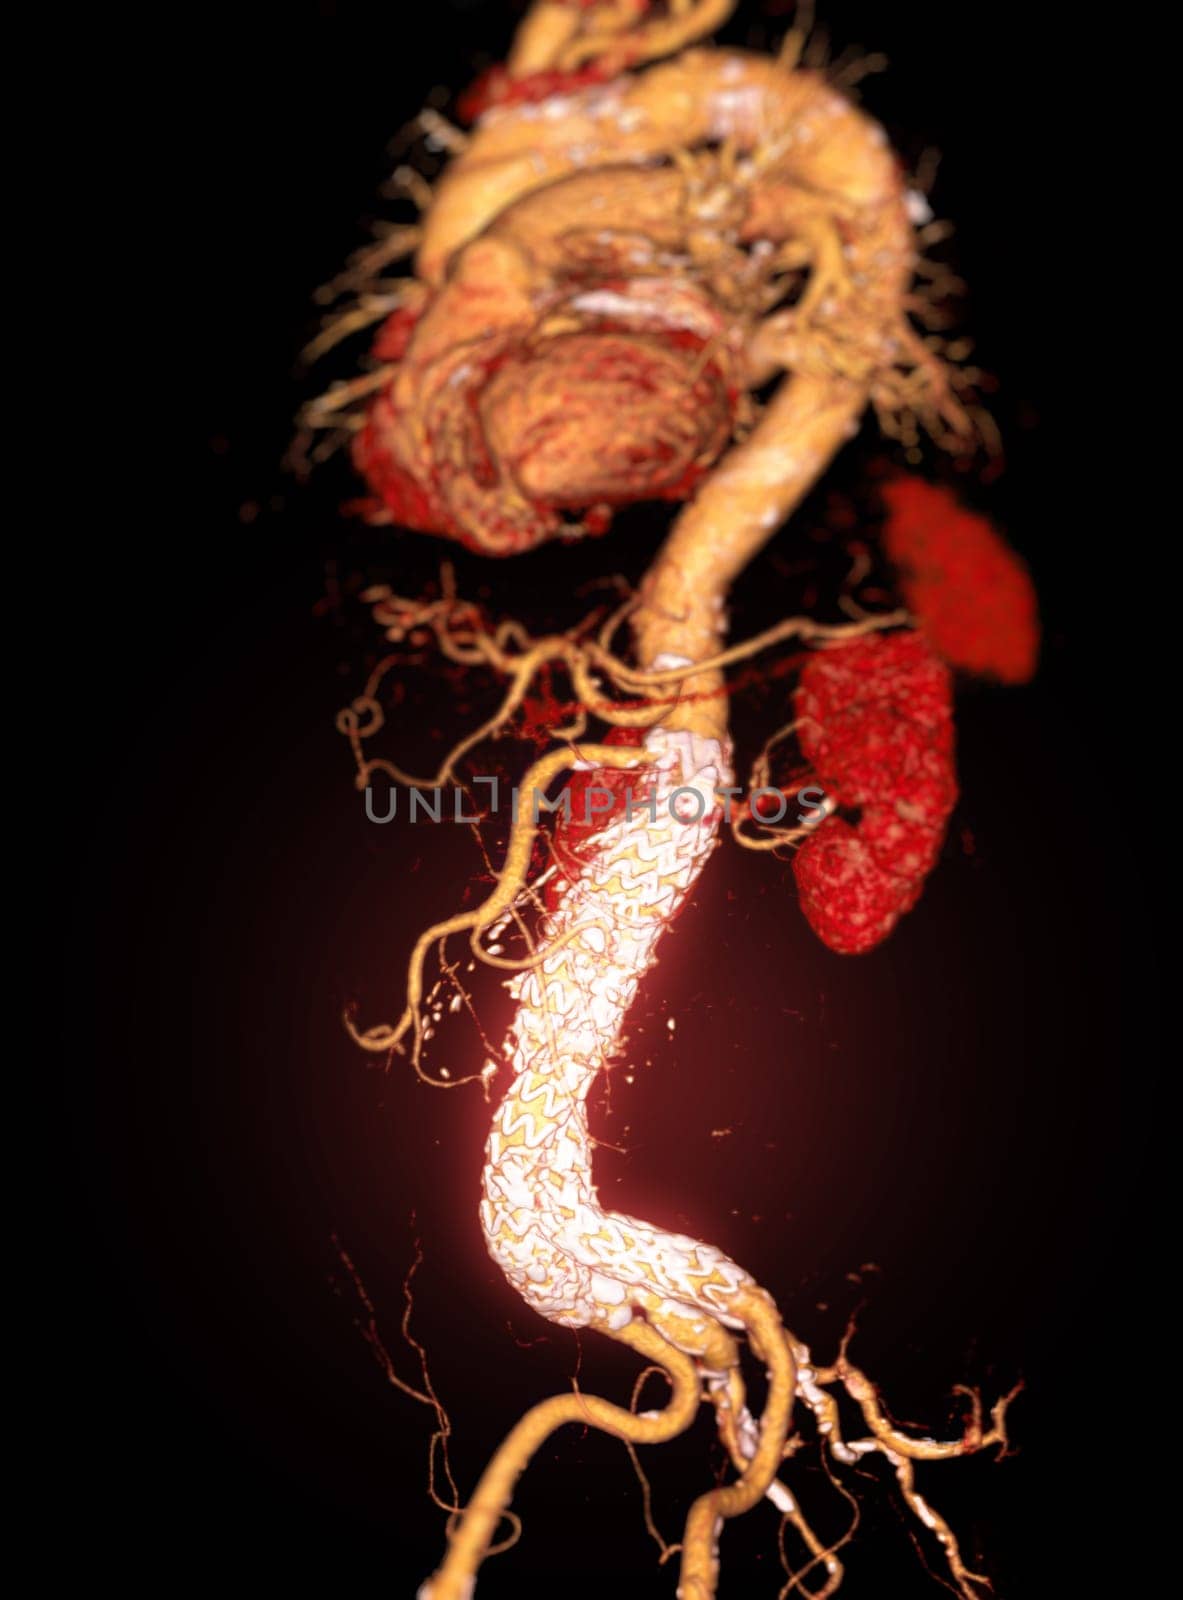 CTA whole aorta with Abdominal aorta stent graft 3D rendering image in case  abdominal aortic aneurysms.